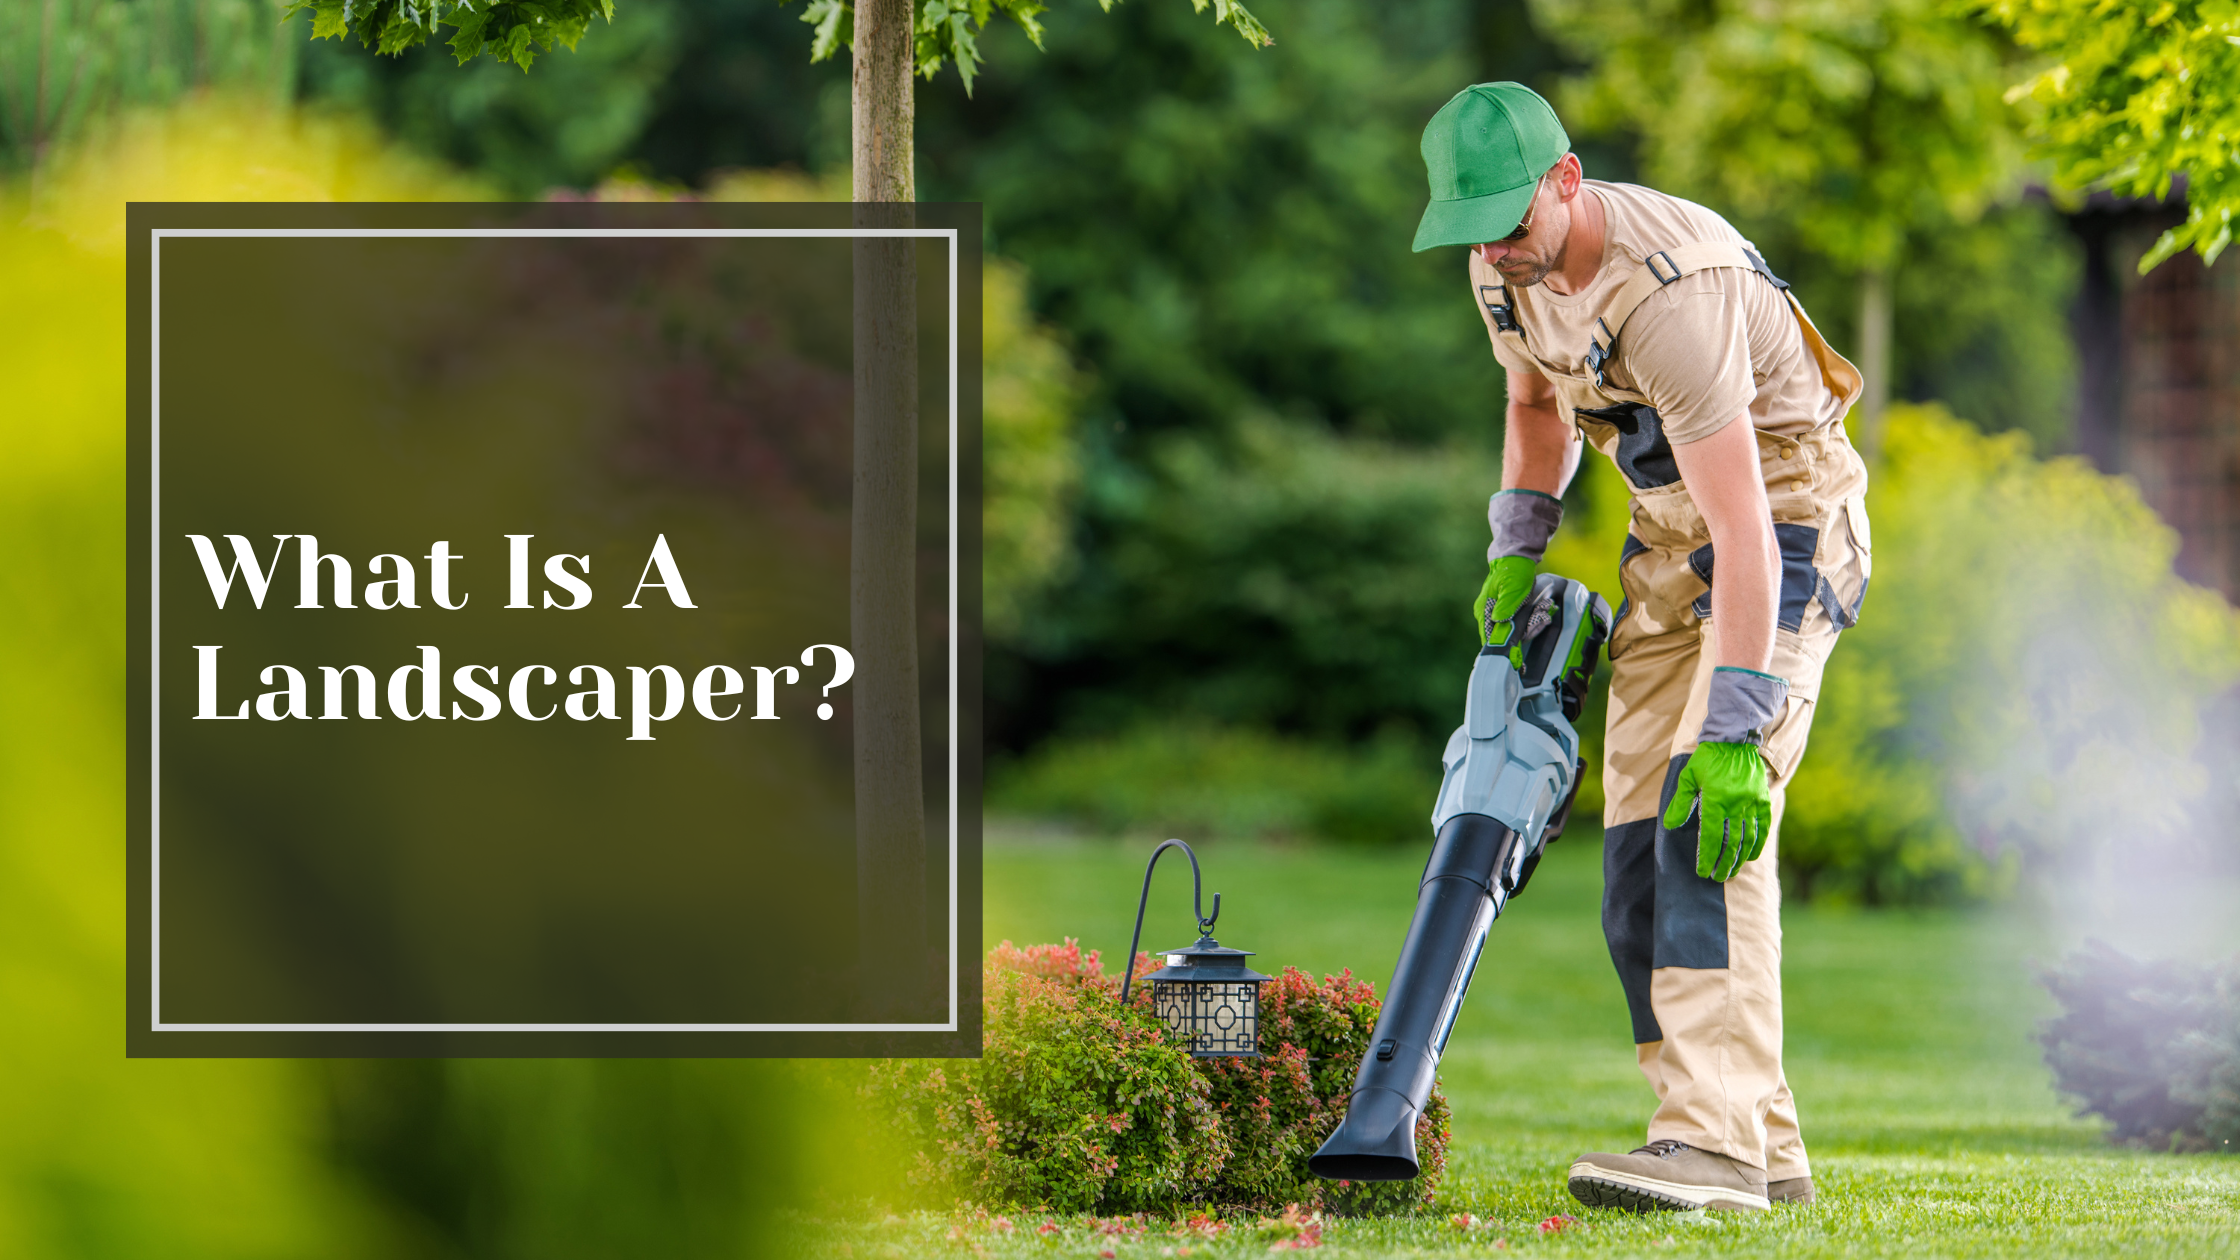 What Is A Landscaper?